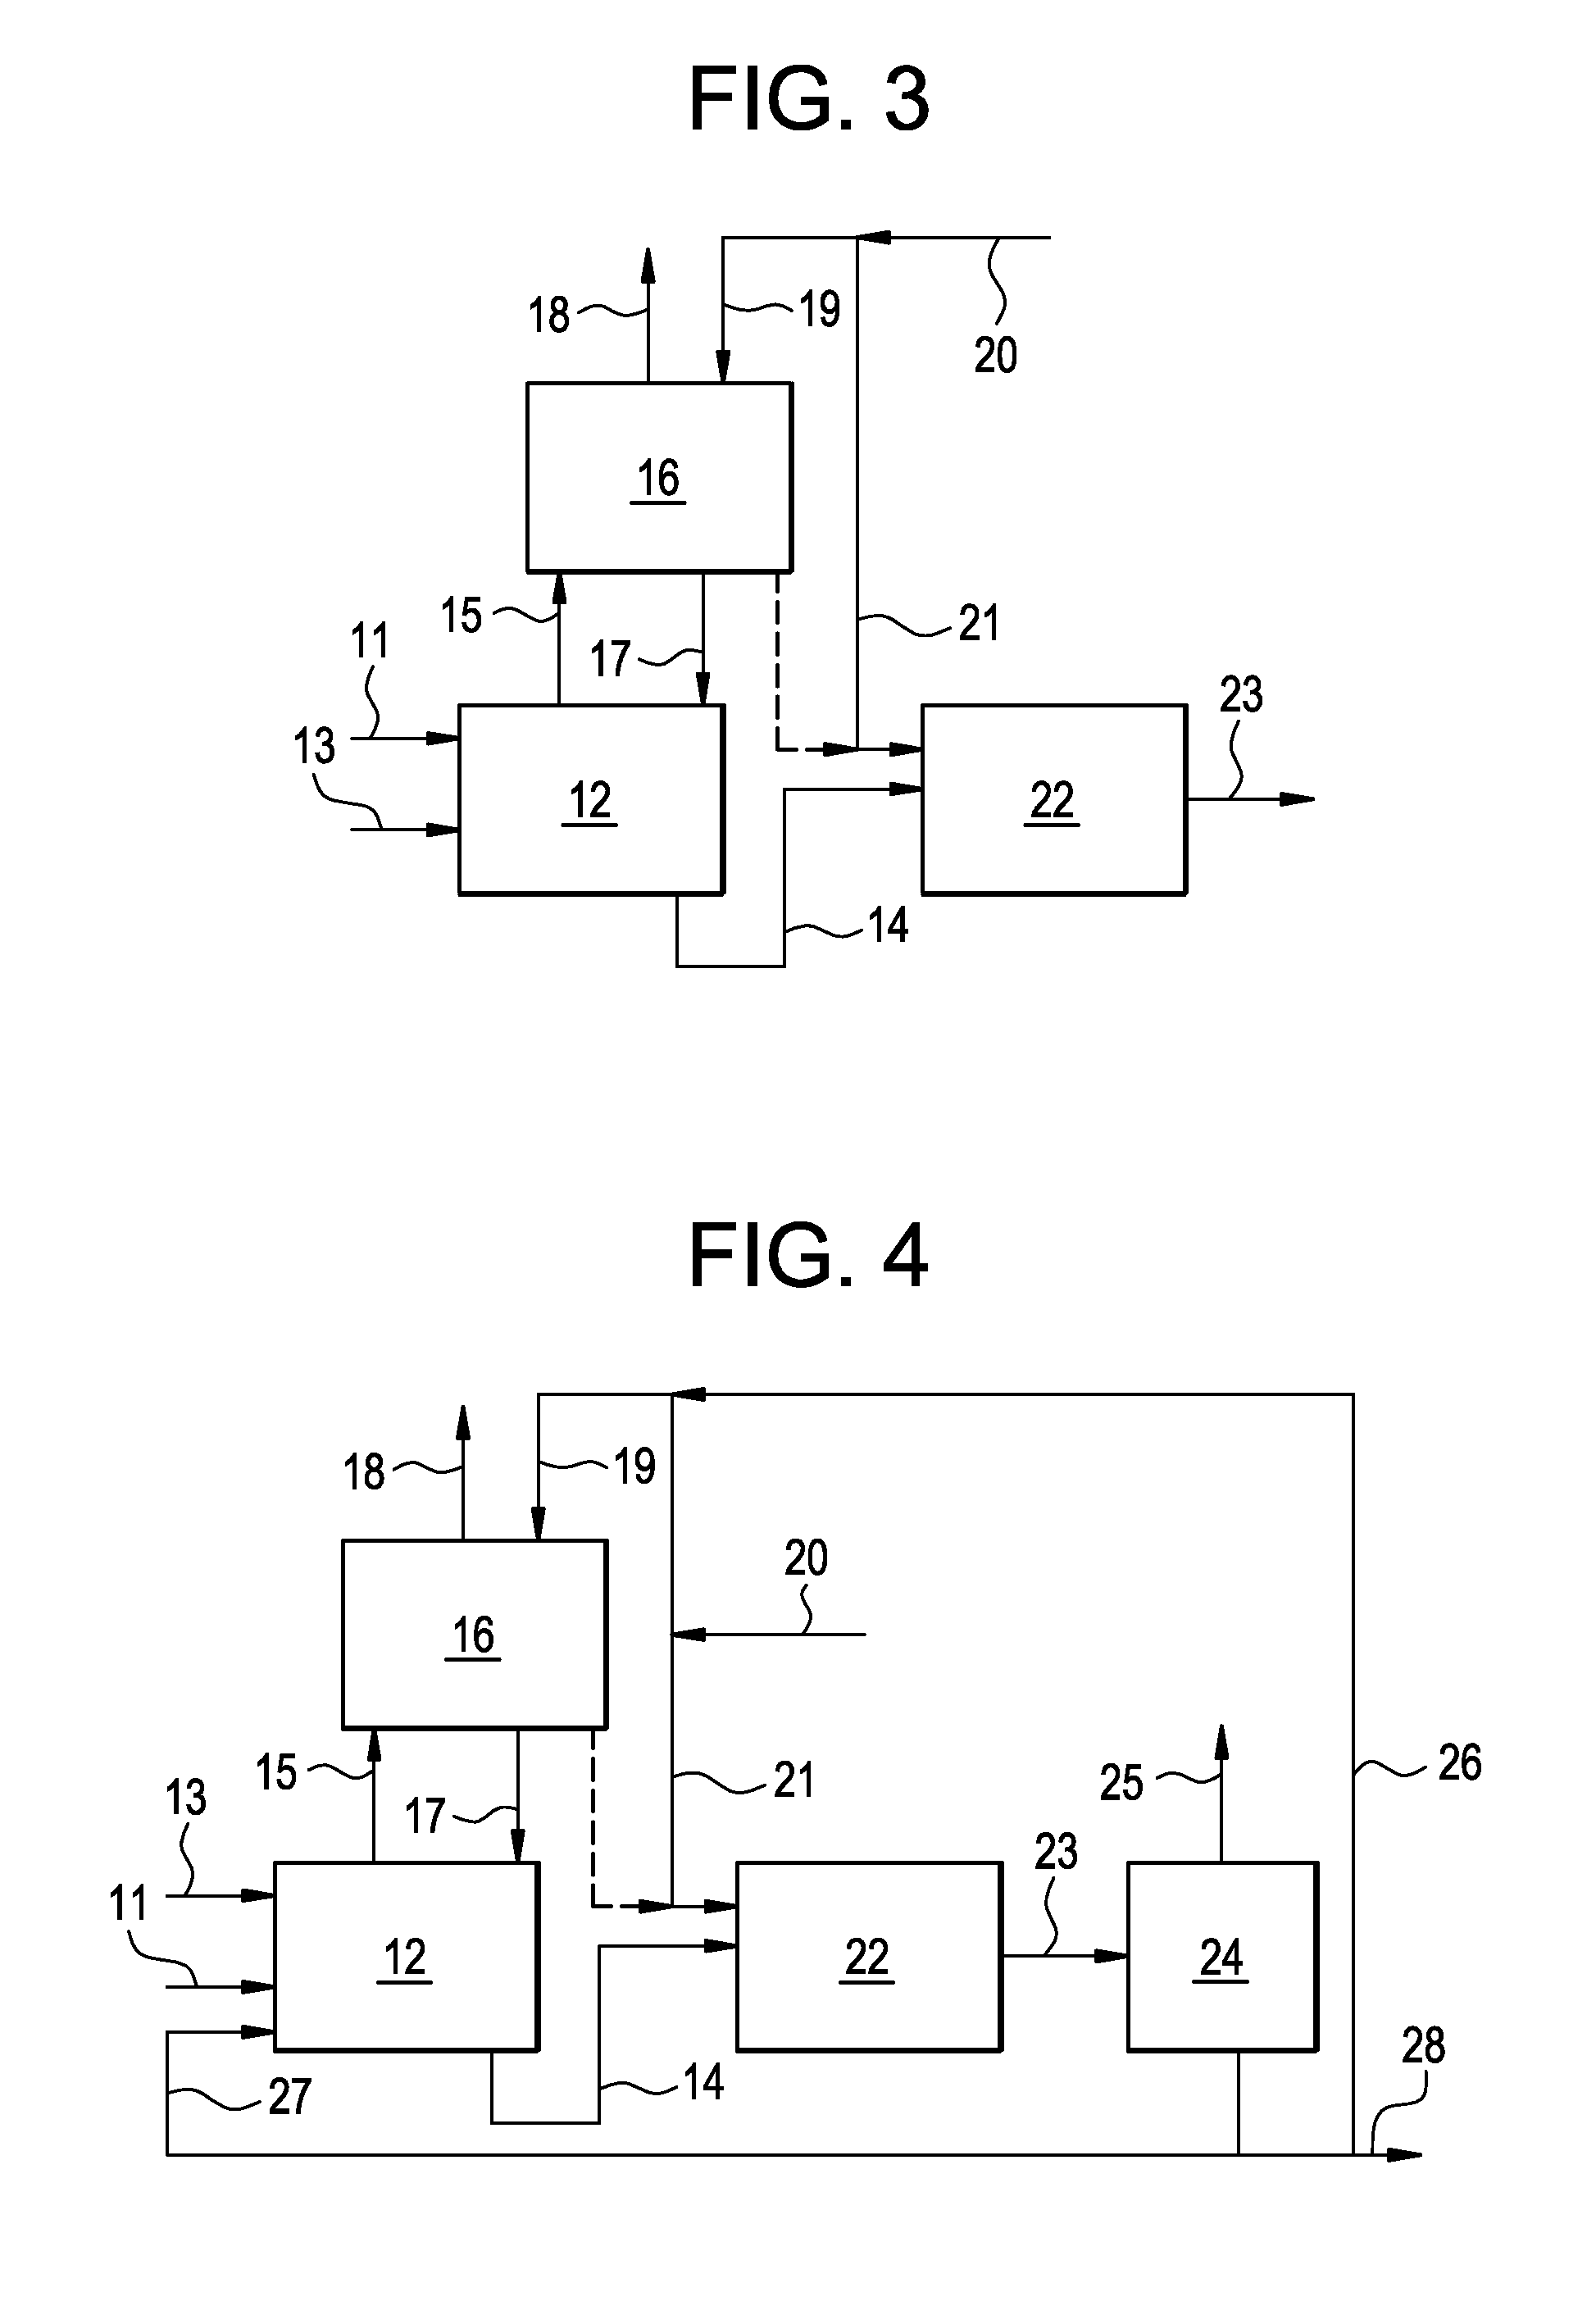 Process and apparatus for vapor phase purification during hydrochlorination of multi-hydroxylated aliphatic hydrocarbon compounds